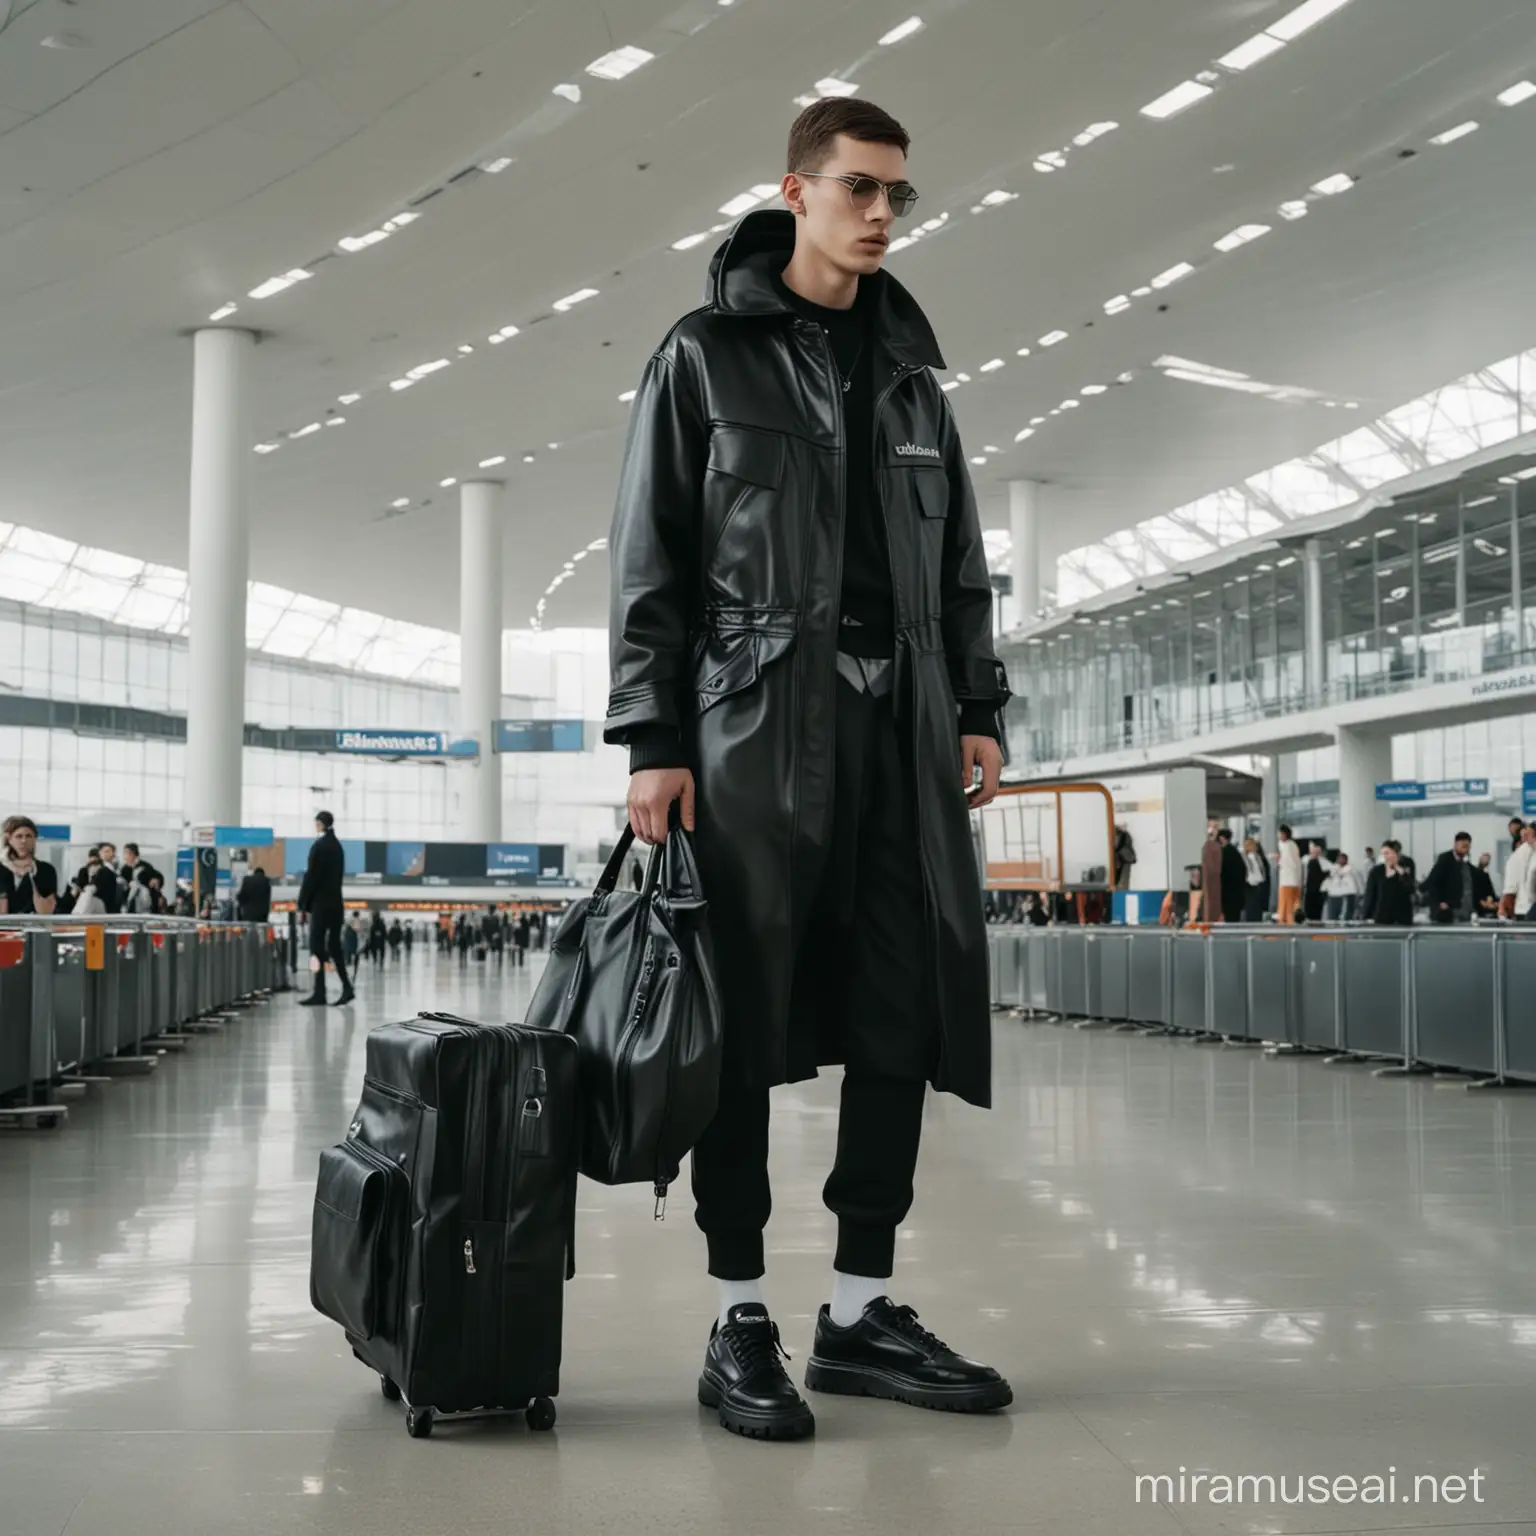 balanciaga is creating a new line inspired by the retrofuturism esthetic, generate me an image with a man wearing a dark balanciaga outfit inside a retro airport